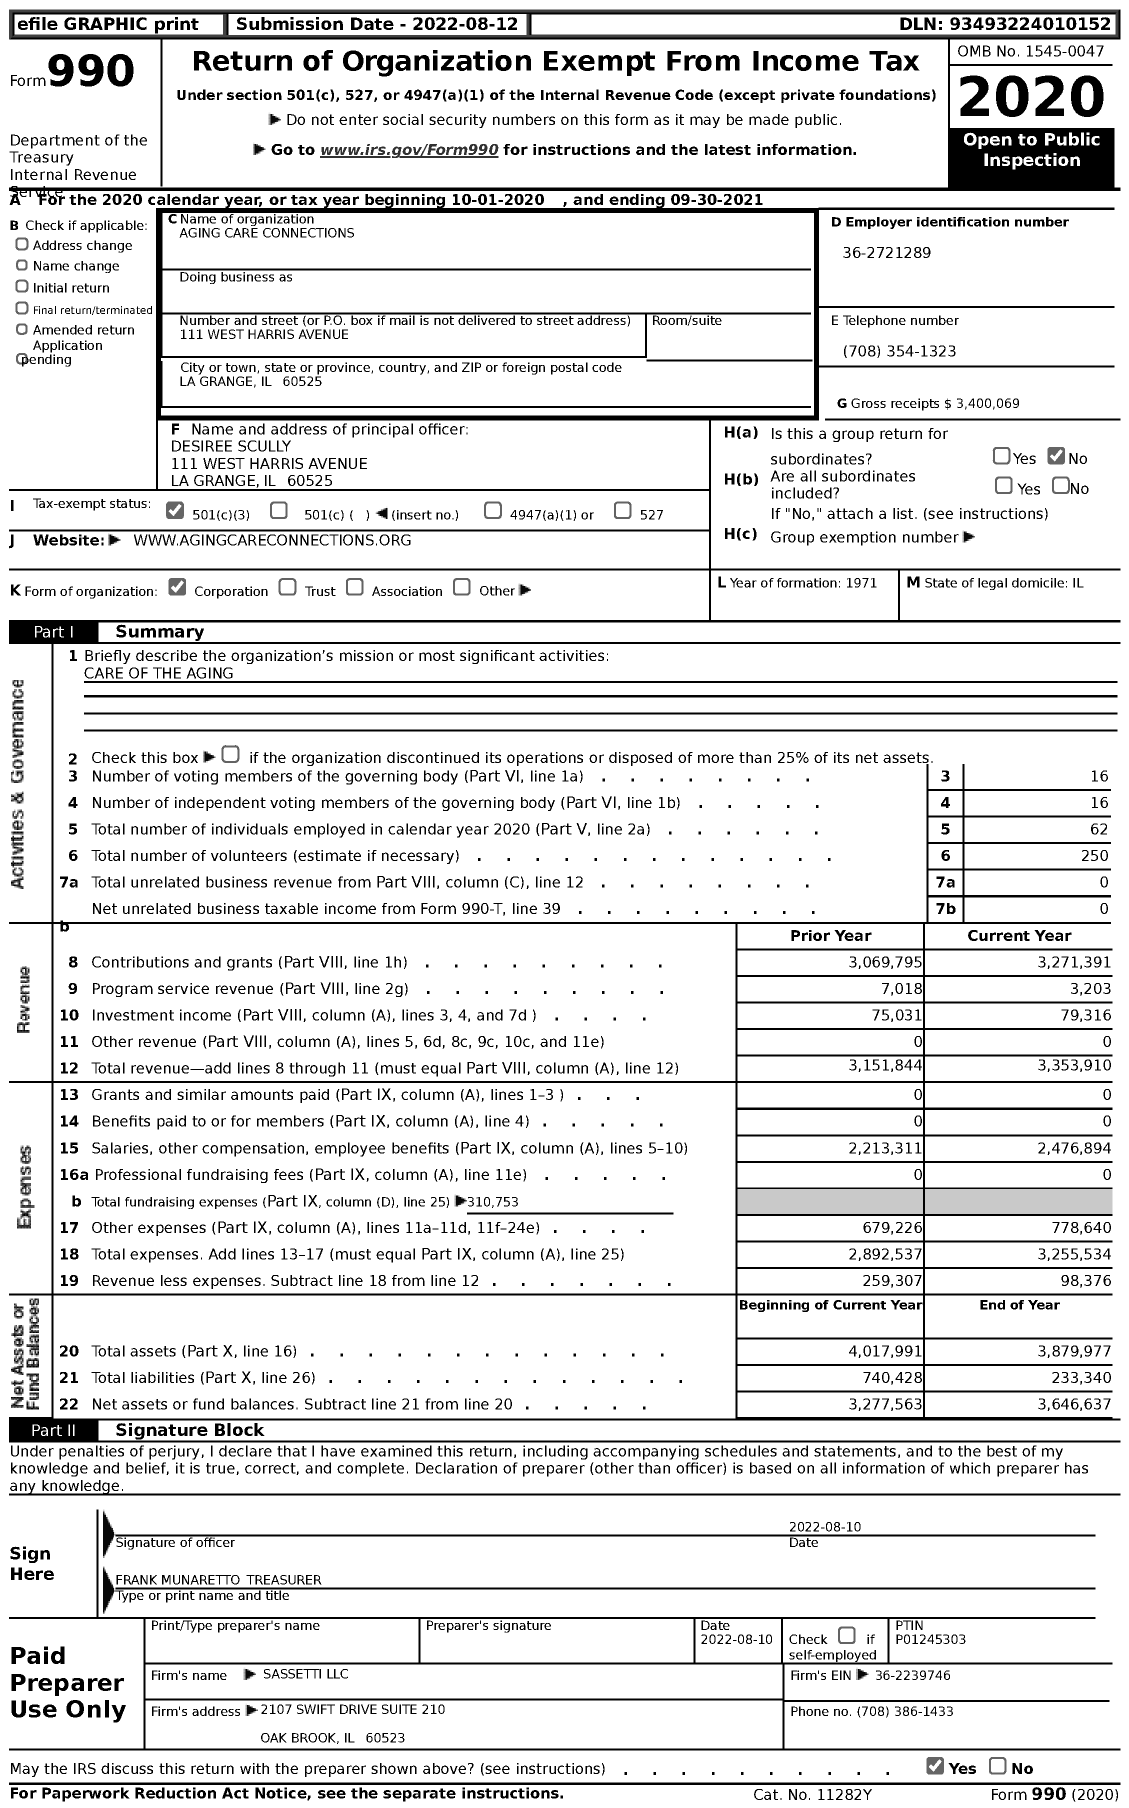 Image of first page of 2020 Form 990 for Aging Care Connections